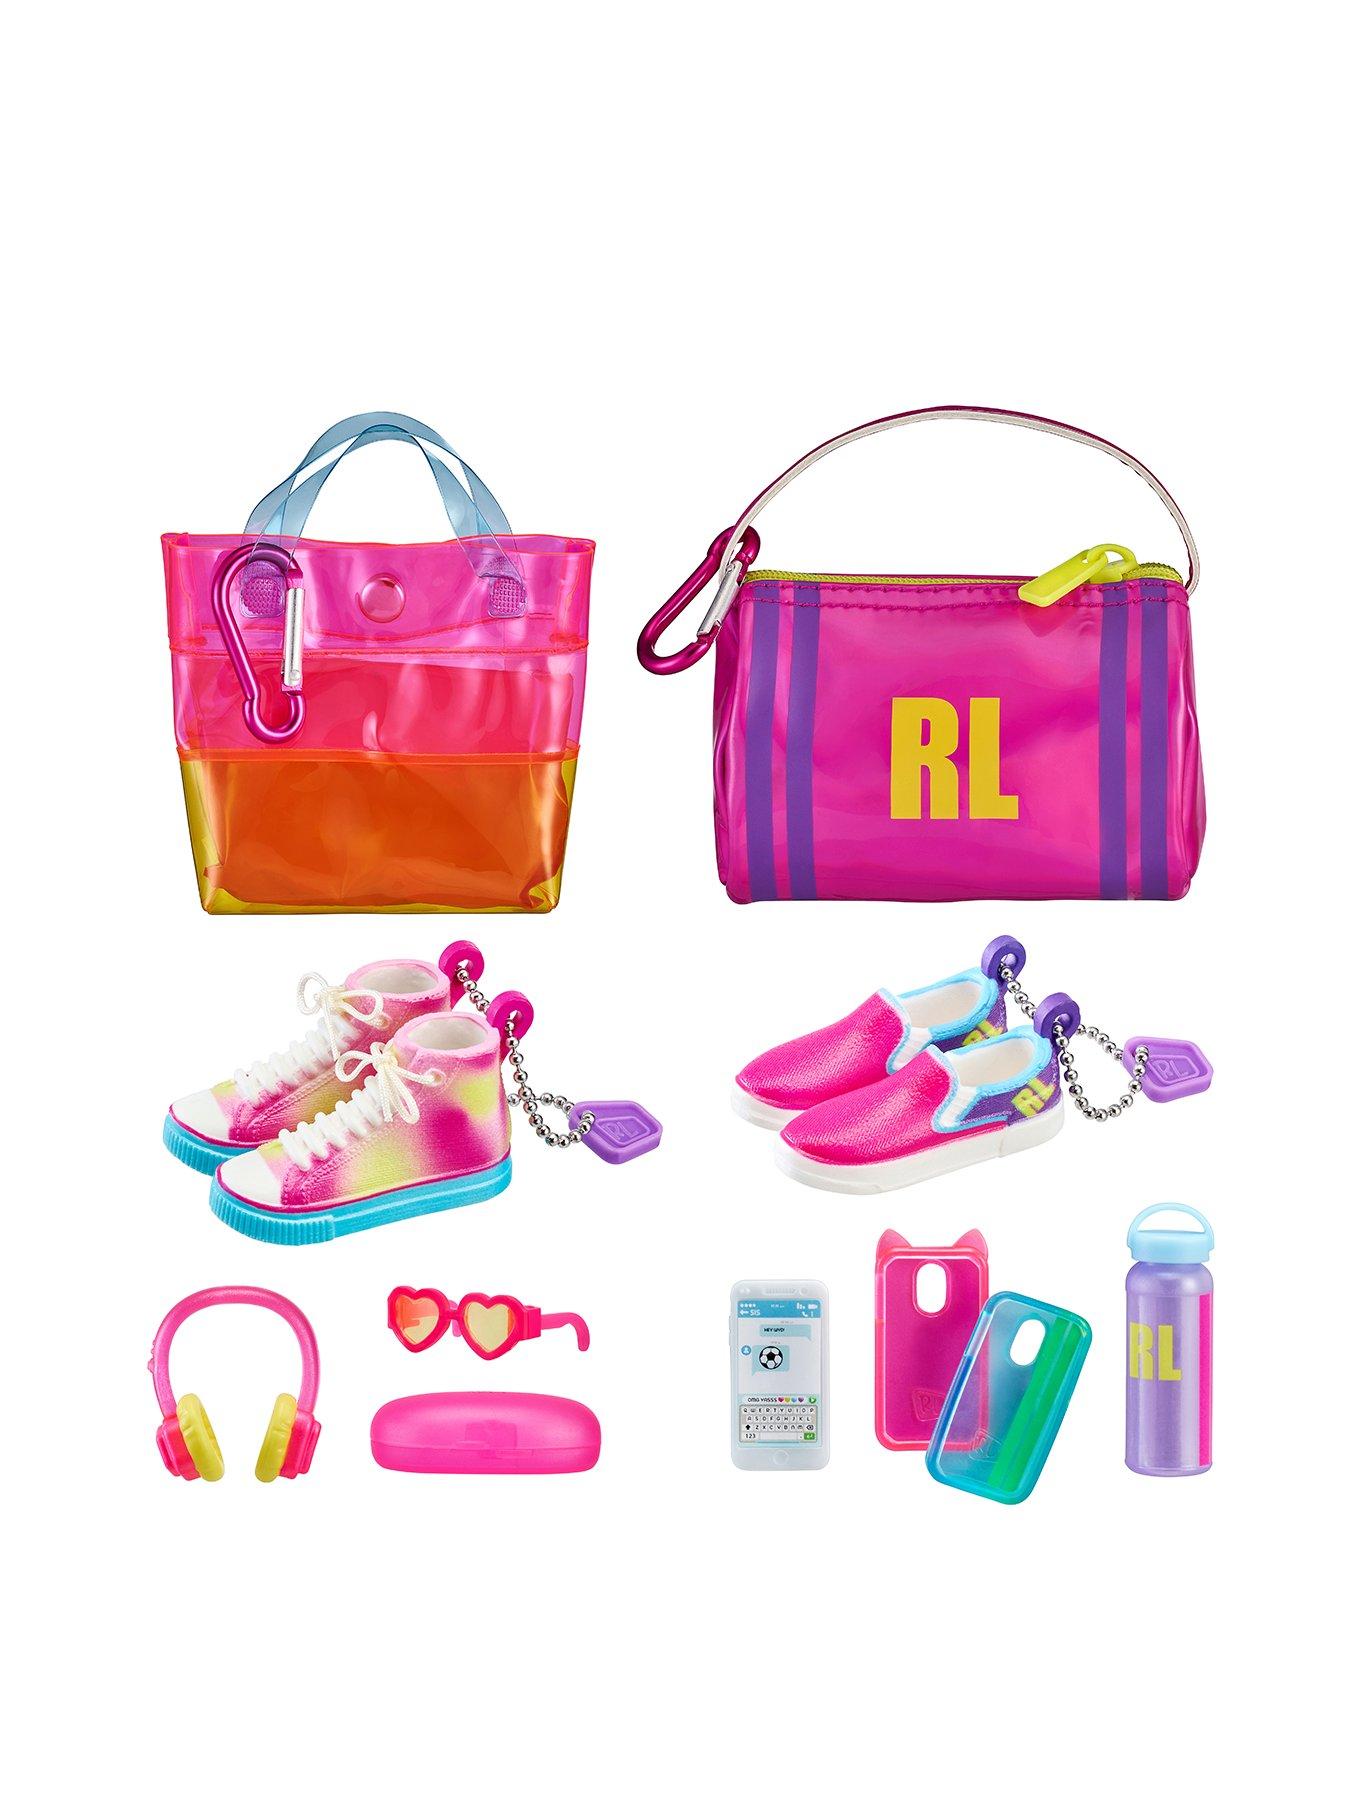 REAL LITTLES - Collectible Micro Handbag Collection with 17 Surprises  Inside!